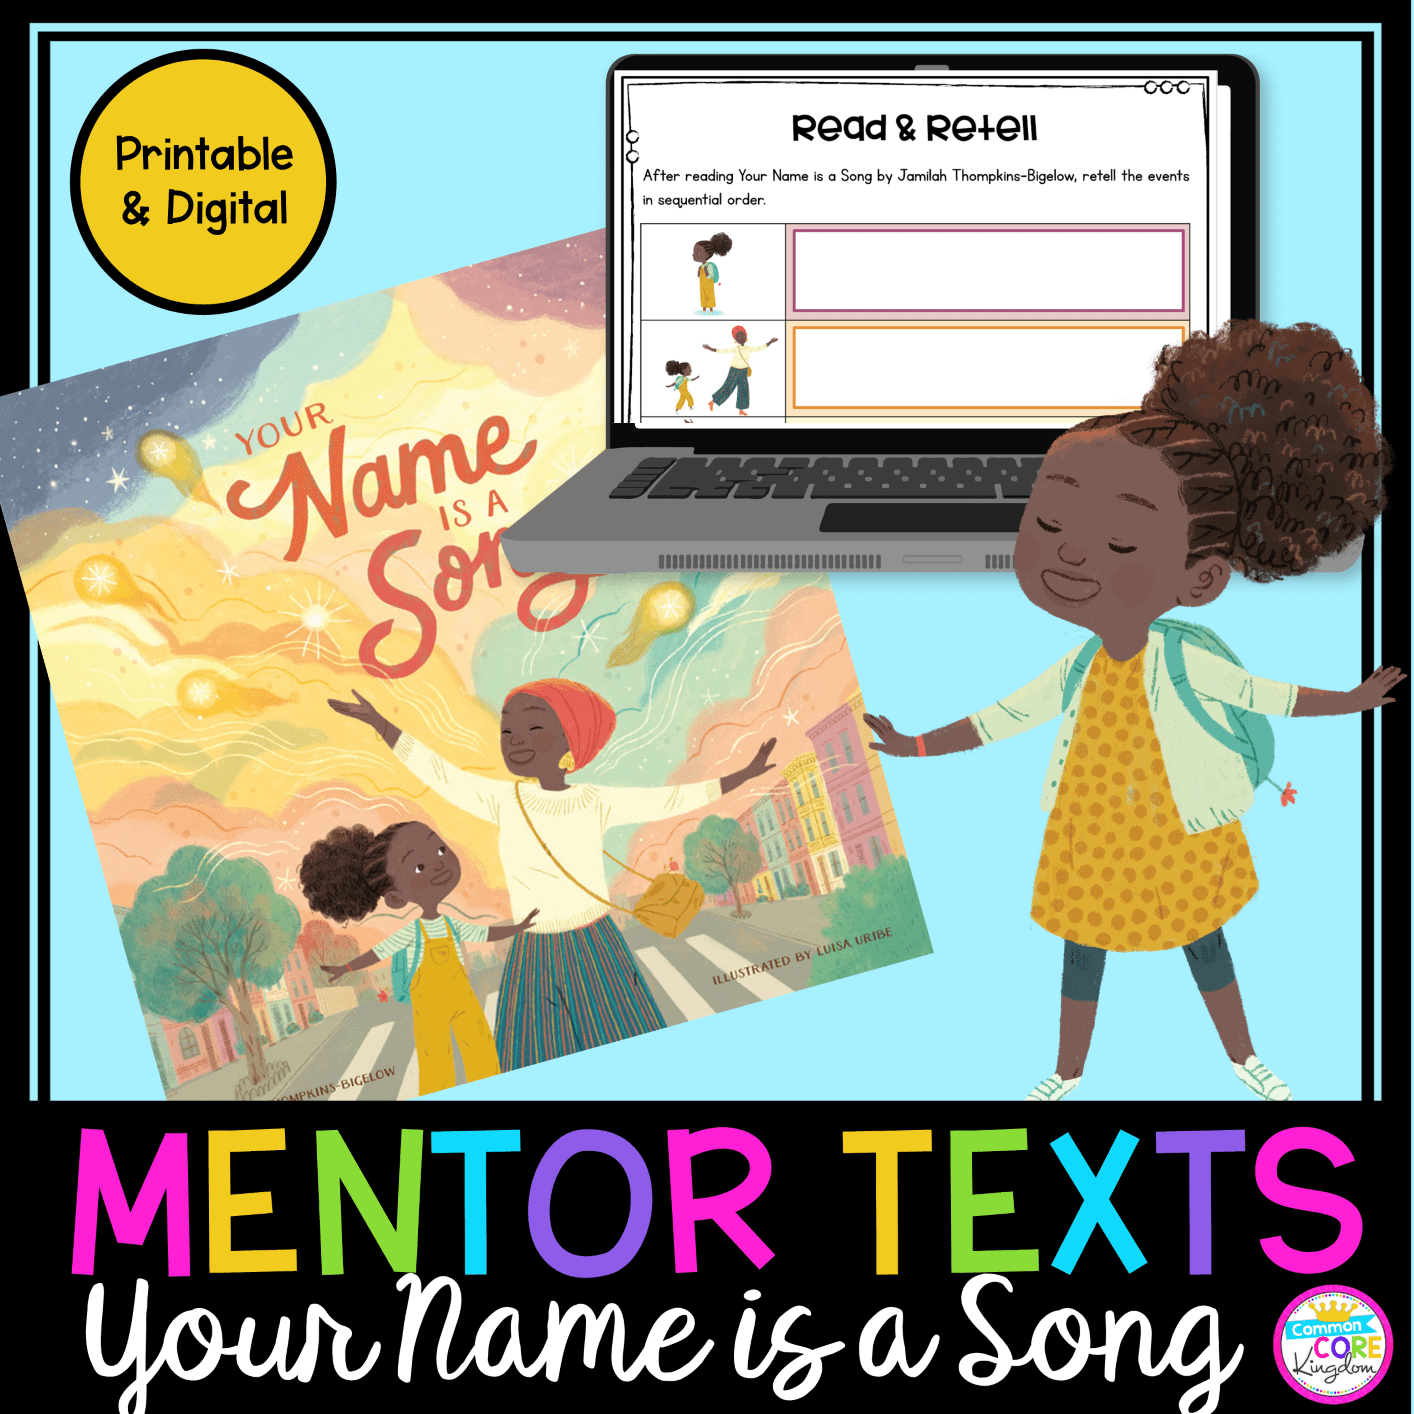 Your Name Is A Song digital and printable mentor text unit cover